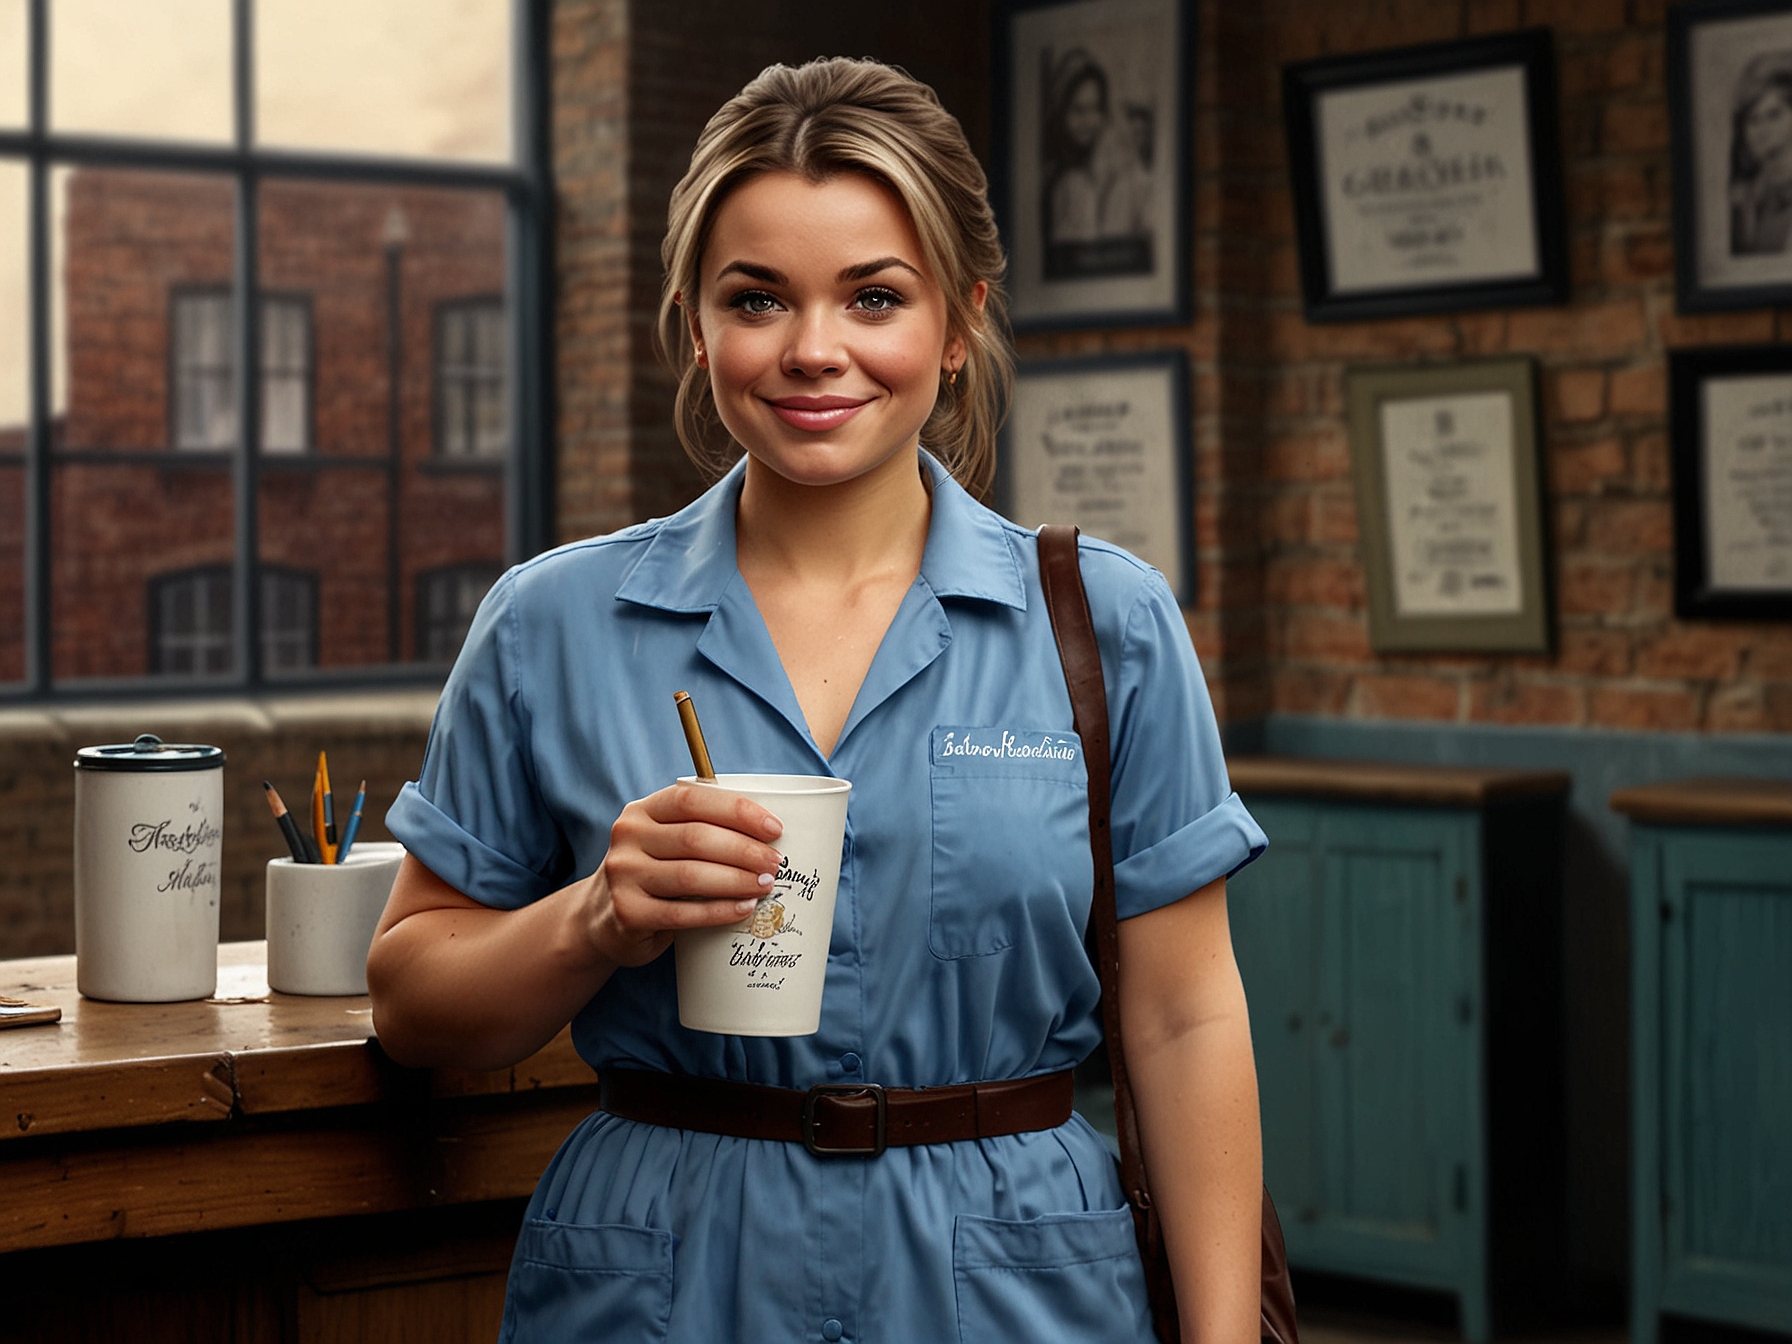 Sydney Martin on the set of Coronation Street, dressed in character as Betsy Swain, showcasing her acting skills and dedication to her new role in the beloved soap opera.